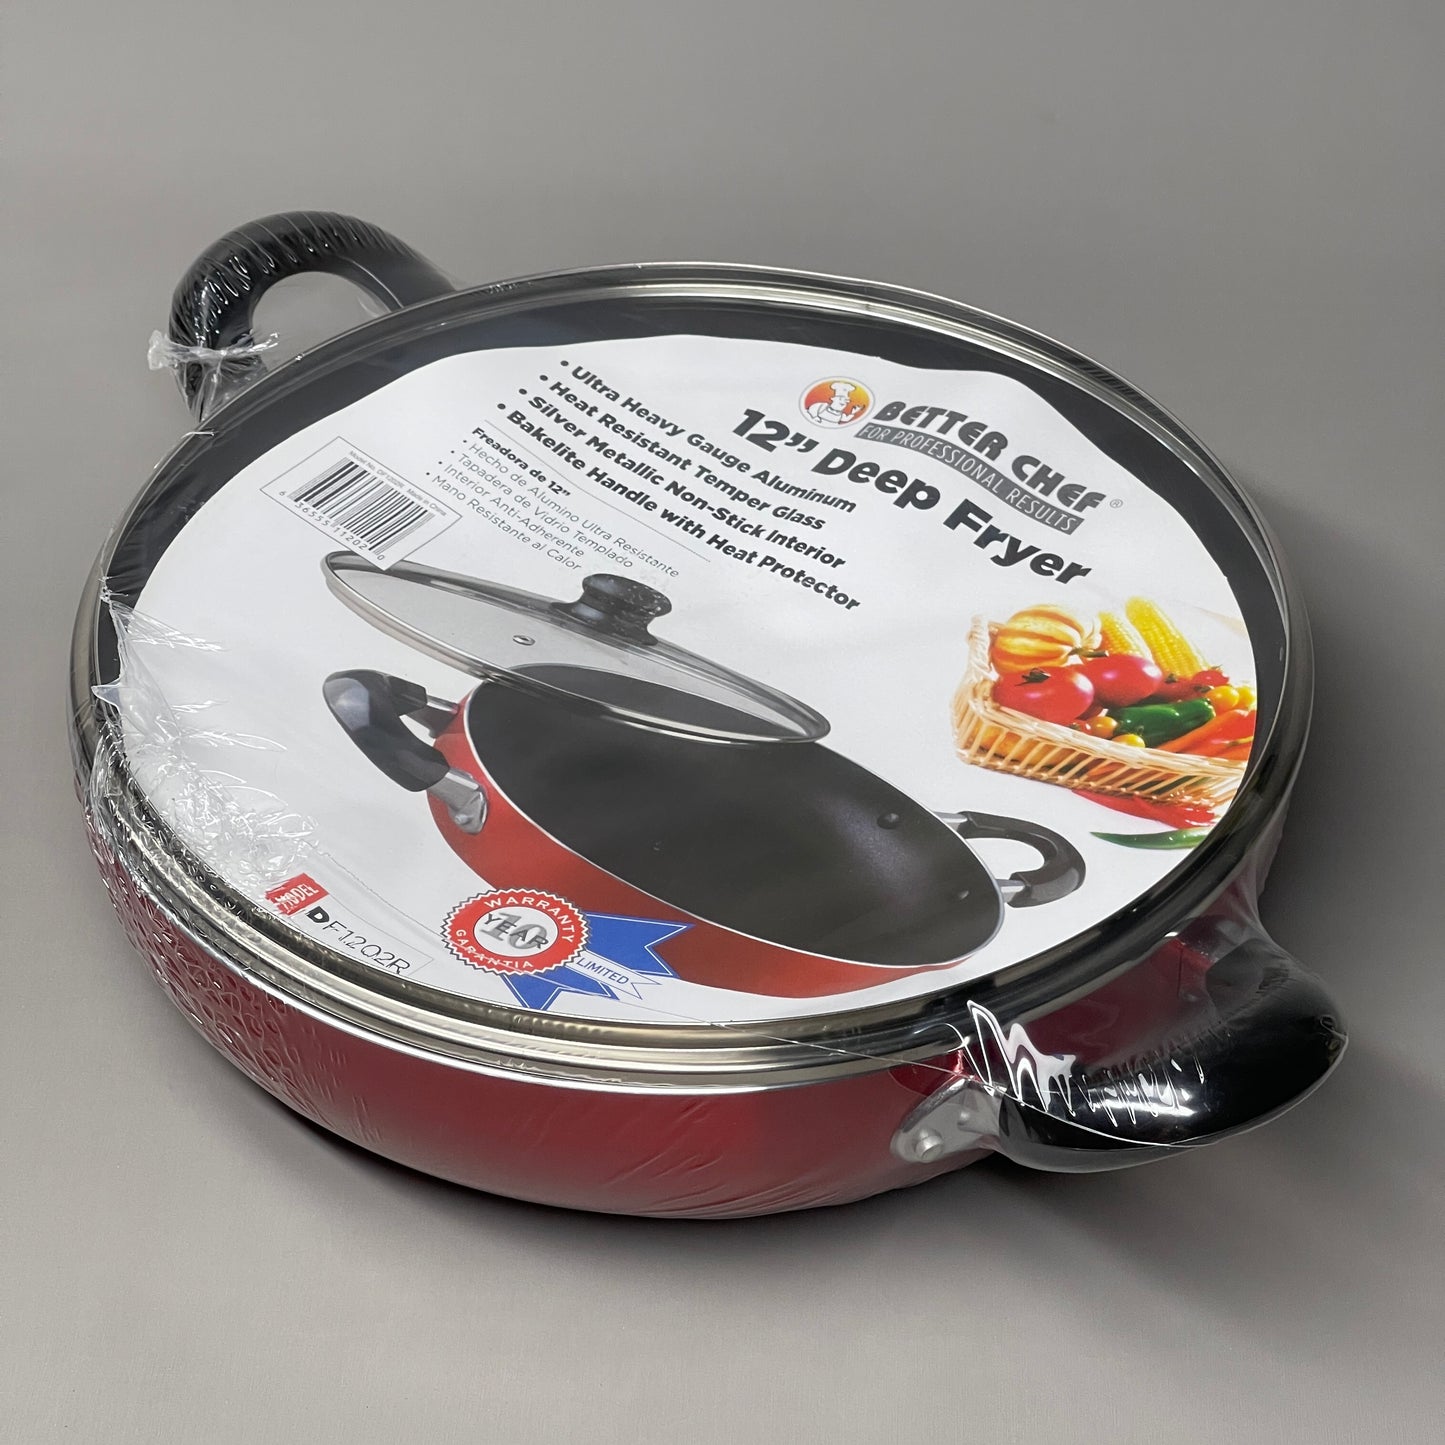 BETTER CHEF Deep Fryer Pan & Lid 12" Non-Stick Coated Aluminum Red DF1202R (New)